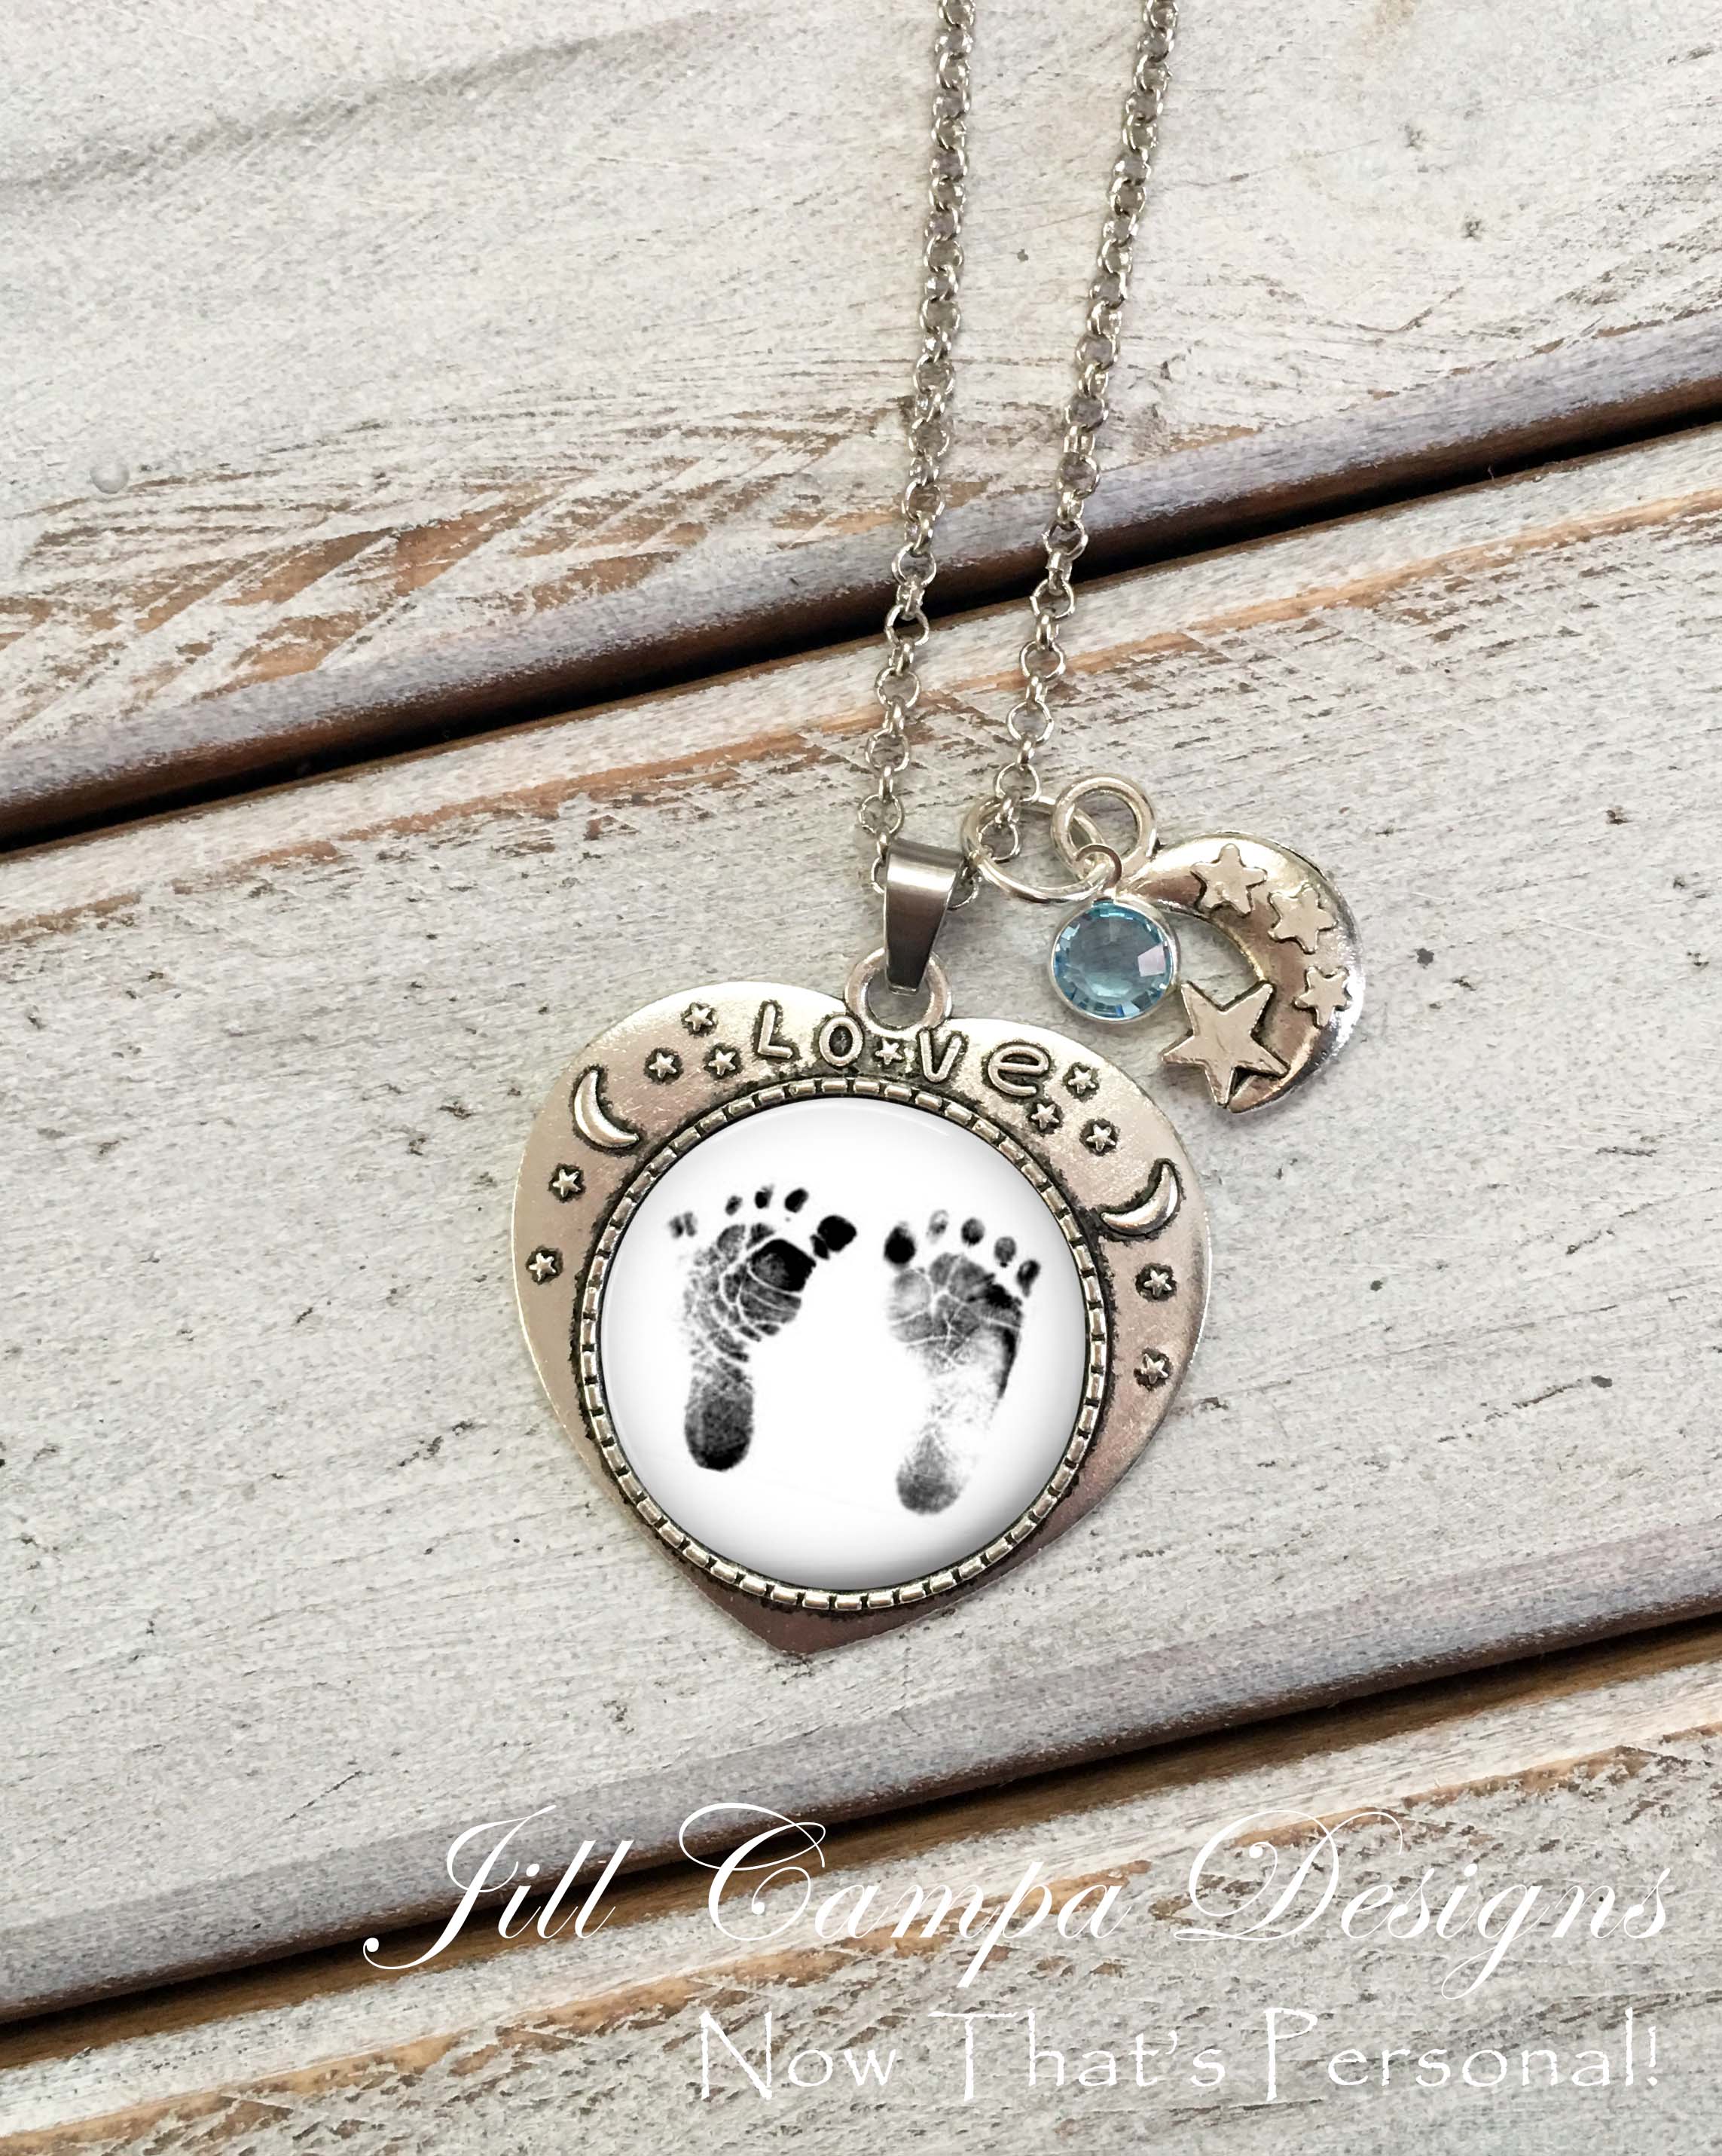 Baby Foot Print Necklace, Exact Replica Of Your New Little Baby's Feet!